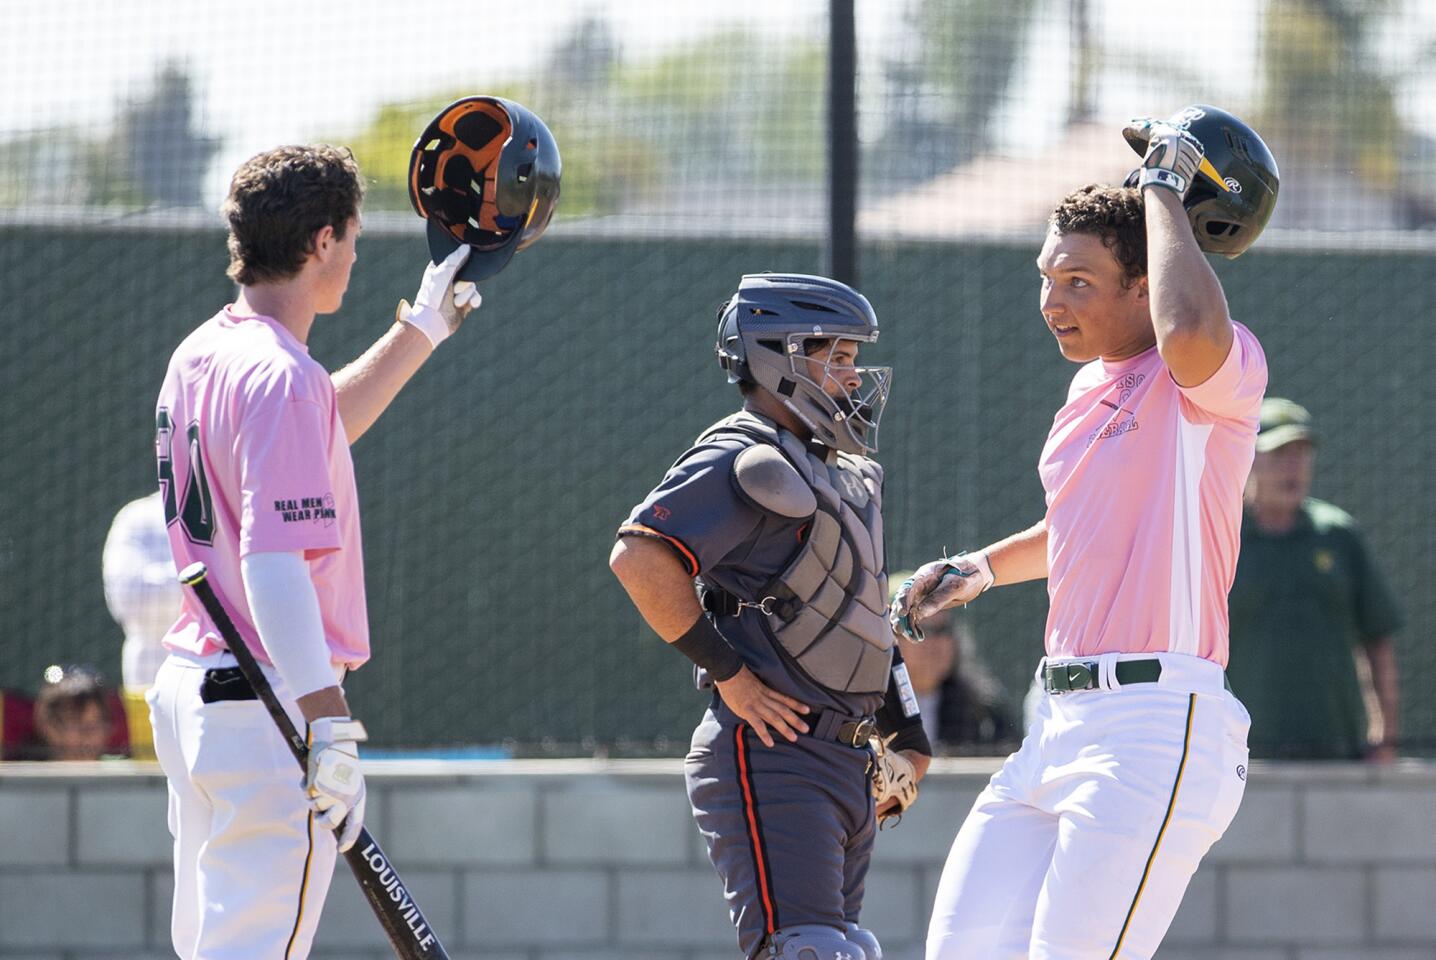 Edison's Matt Swartz, right, gets a high five from Spencer Serven after hitting a solo home run against Huntington Beach during a Sunset League game on Tuesday, May 8.